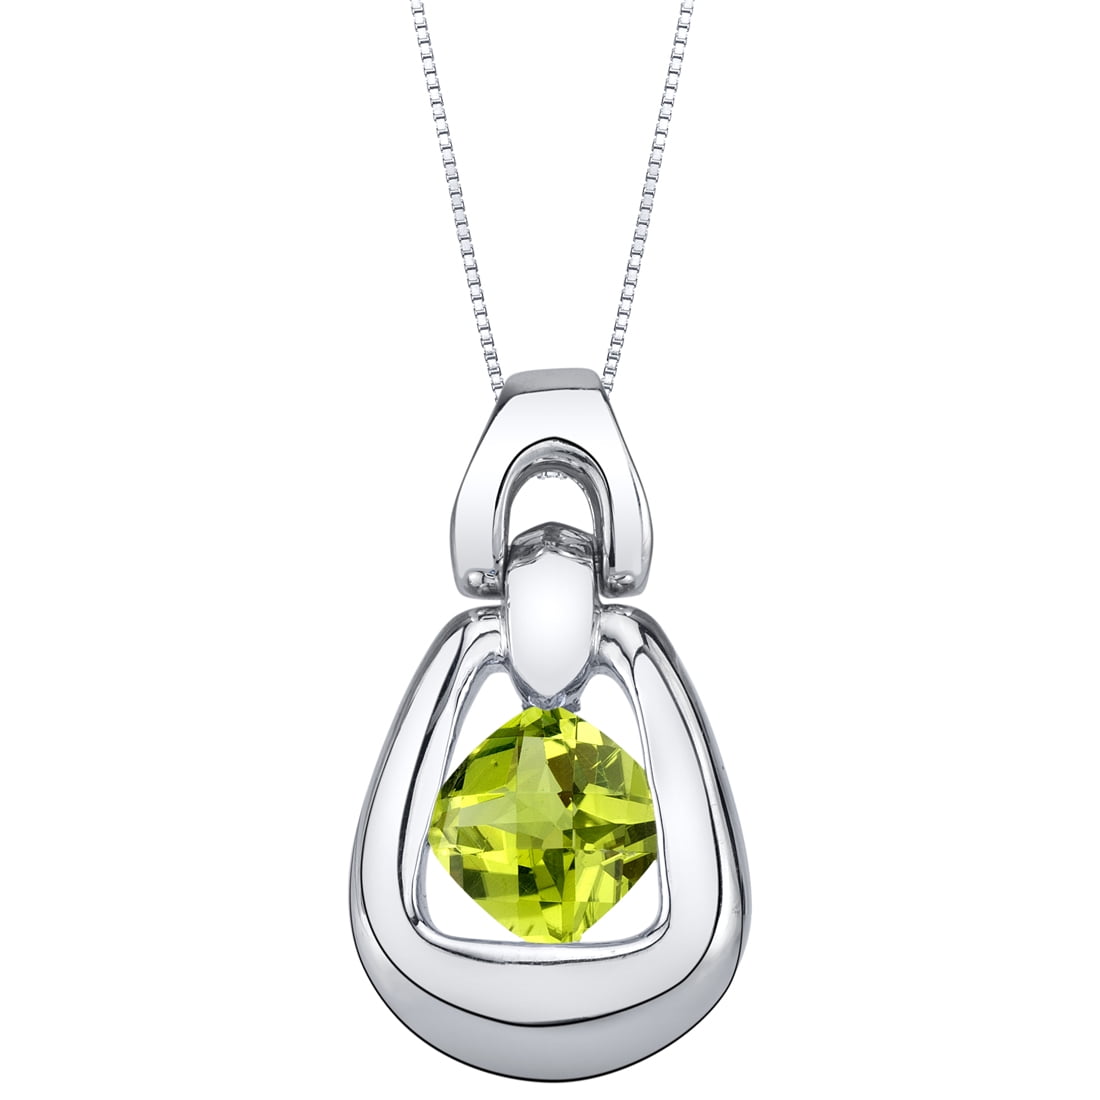 Buy 2 get 1 For Free Water Drop Natural Peridot Platinum Plated Necklace Pendant 